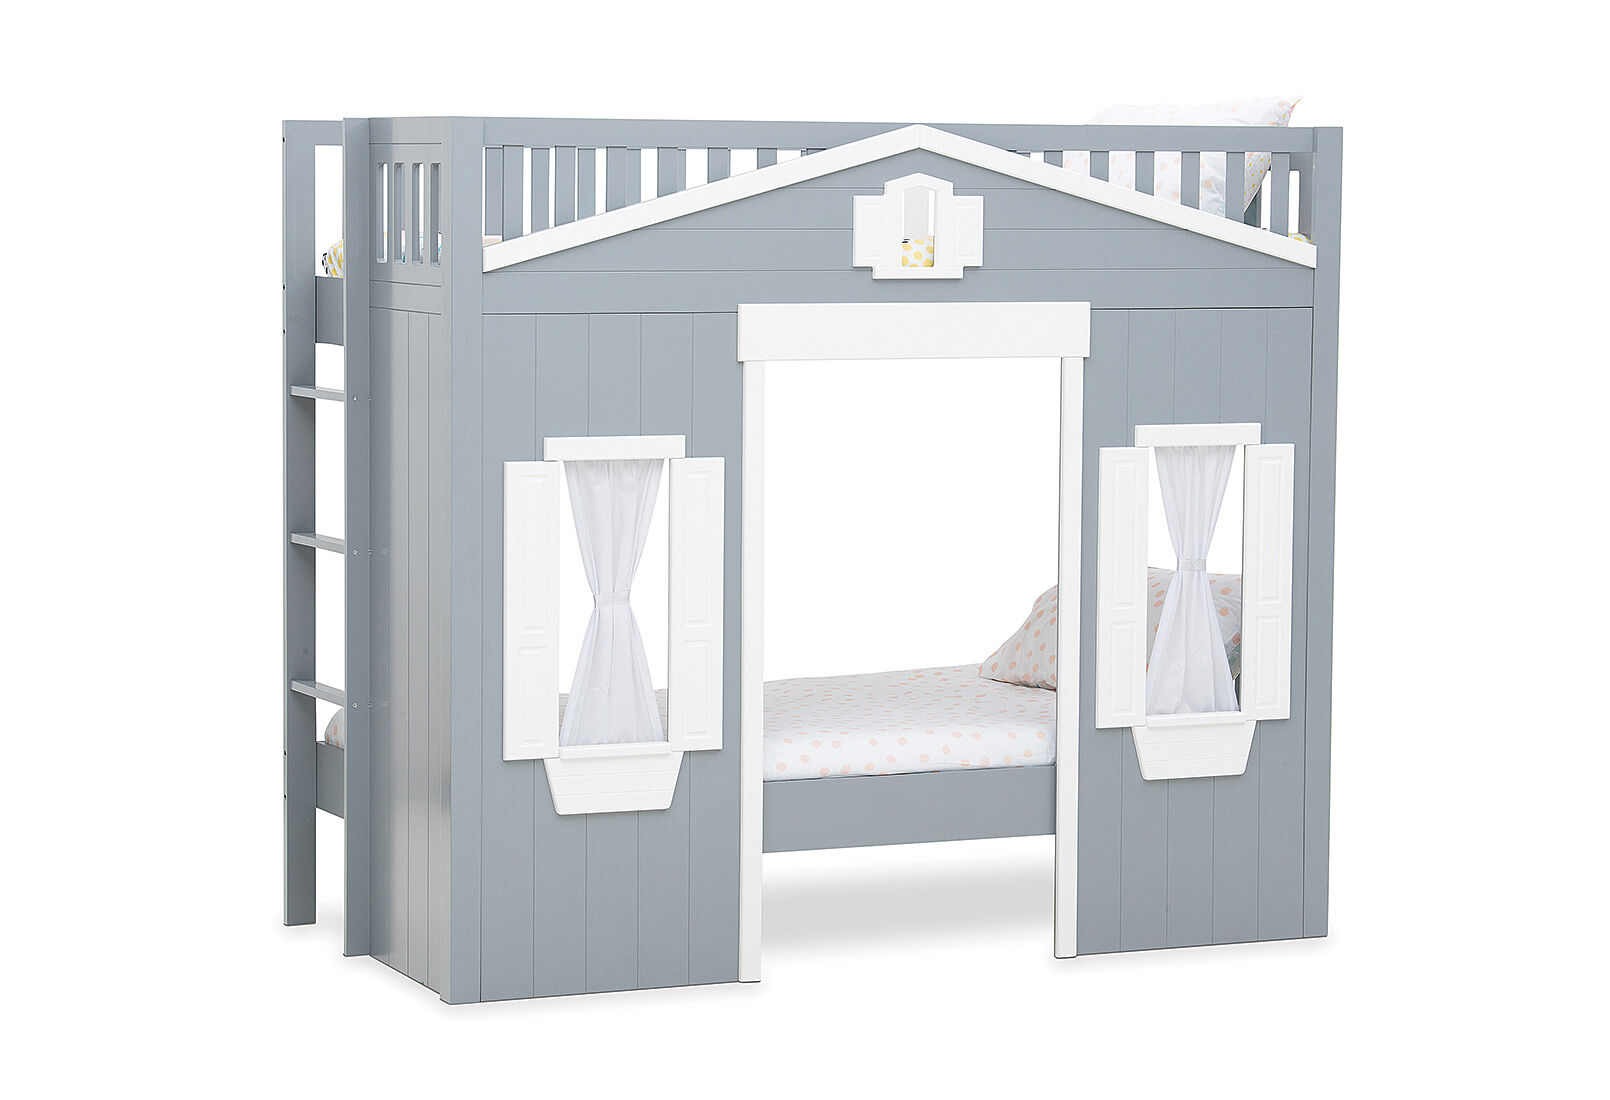 amart cubby house bed